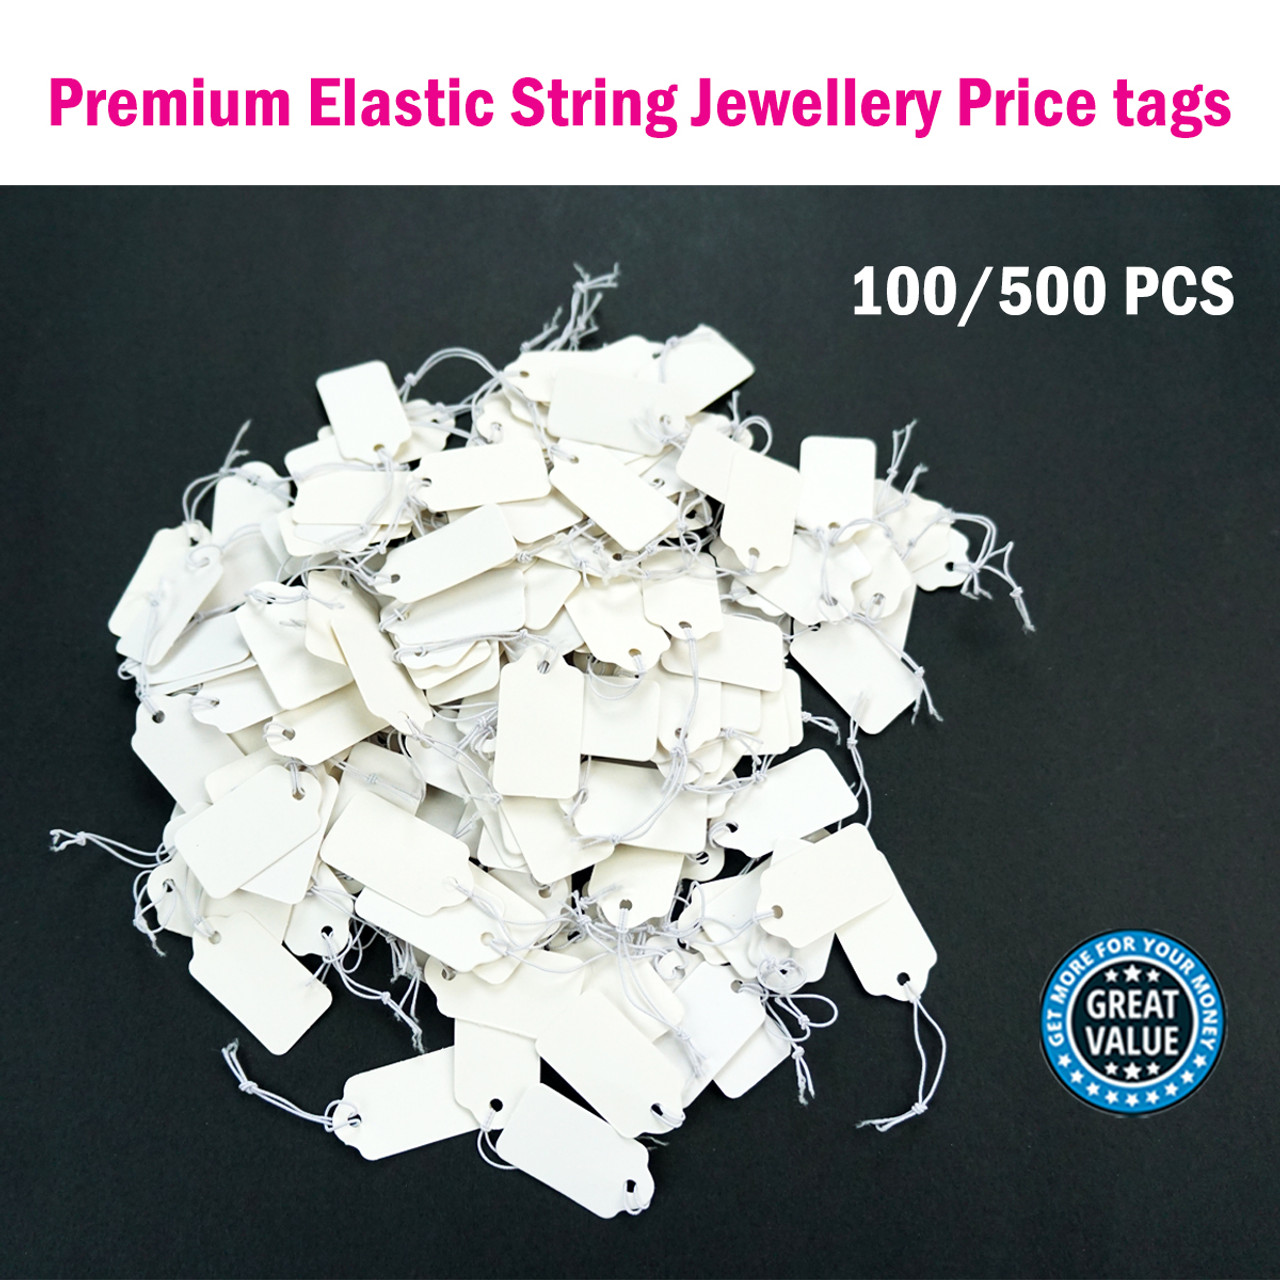 Elastic String Price Tags, Stretchy Strings Jewelry Price Label 100 Pieces